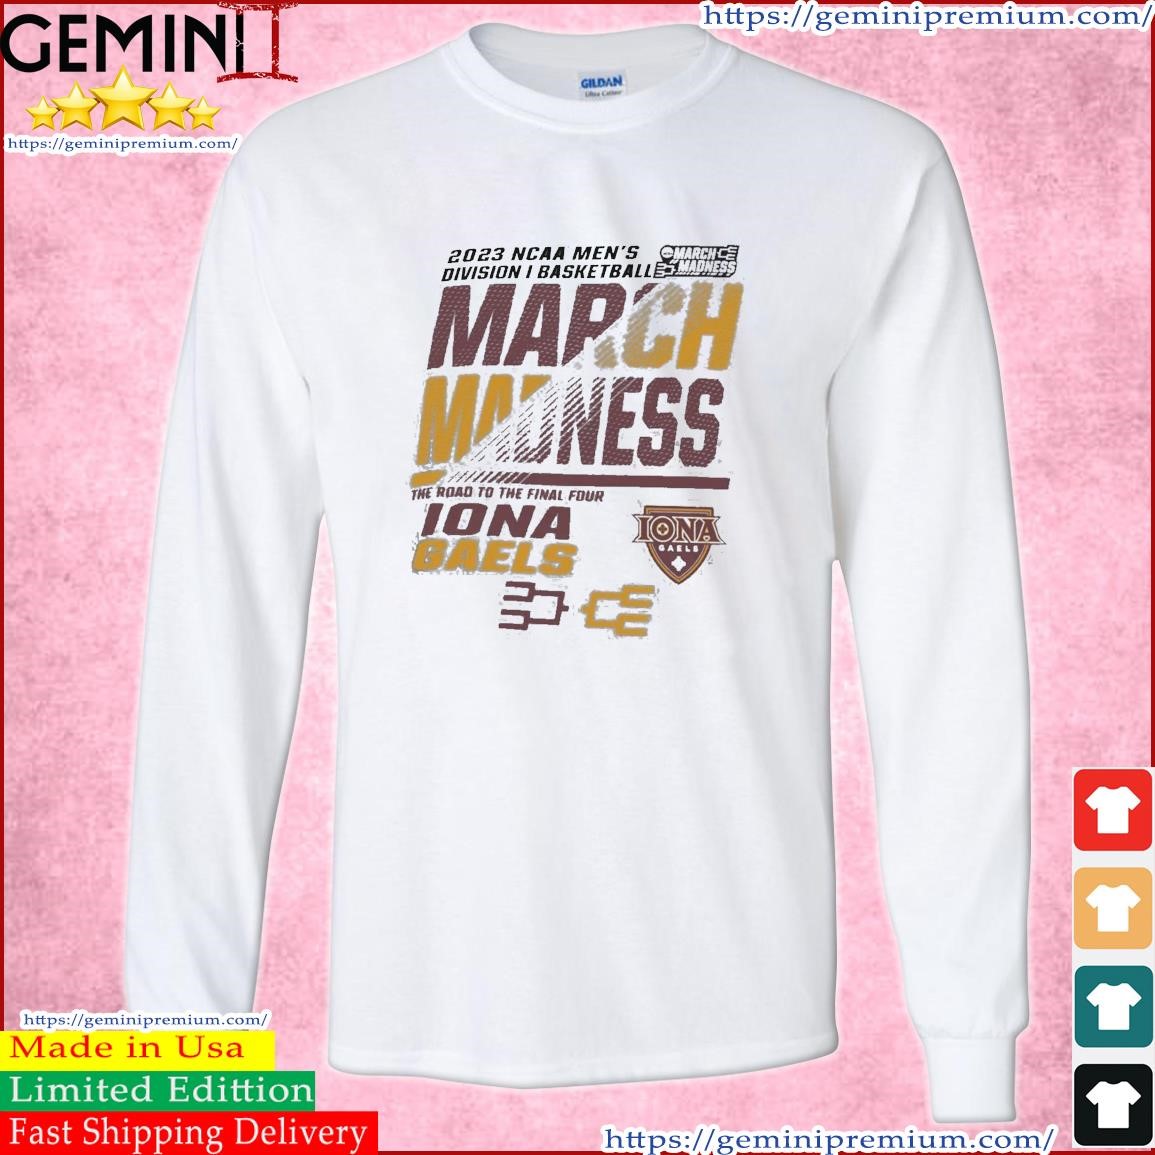 Iona Men's Basketball 2023 NCAA March Madness The Road To Final Four Shirt Long Sleeve Tee.jpg